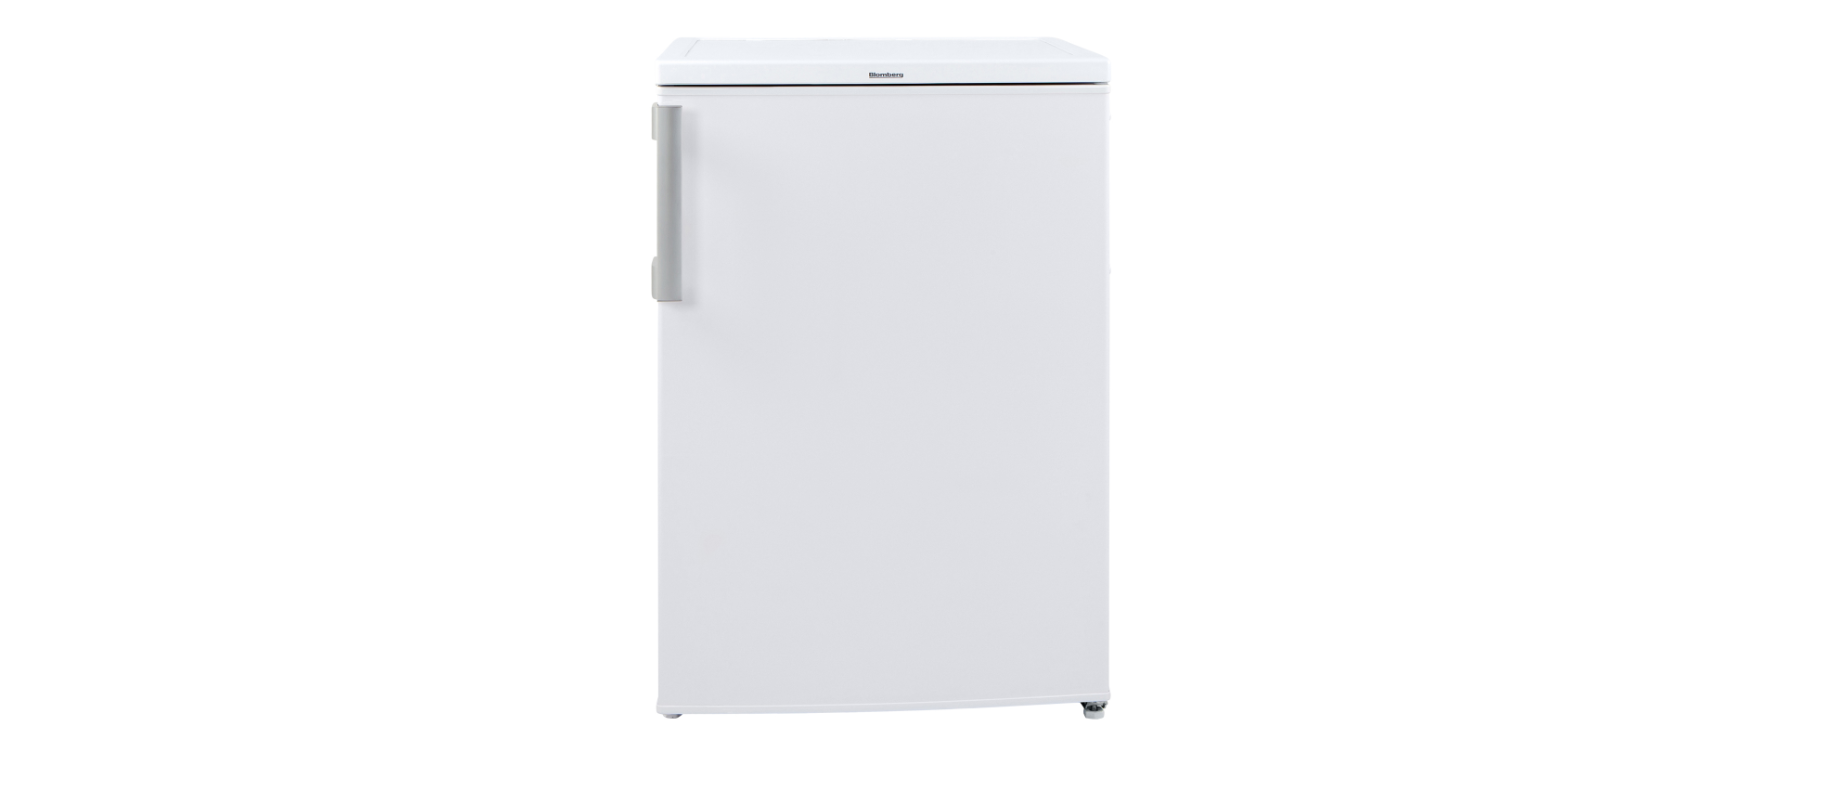 FNE1531P Blomberg Frost Under Counter Freezer